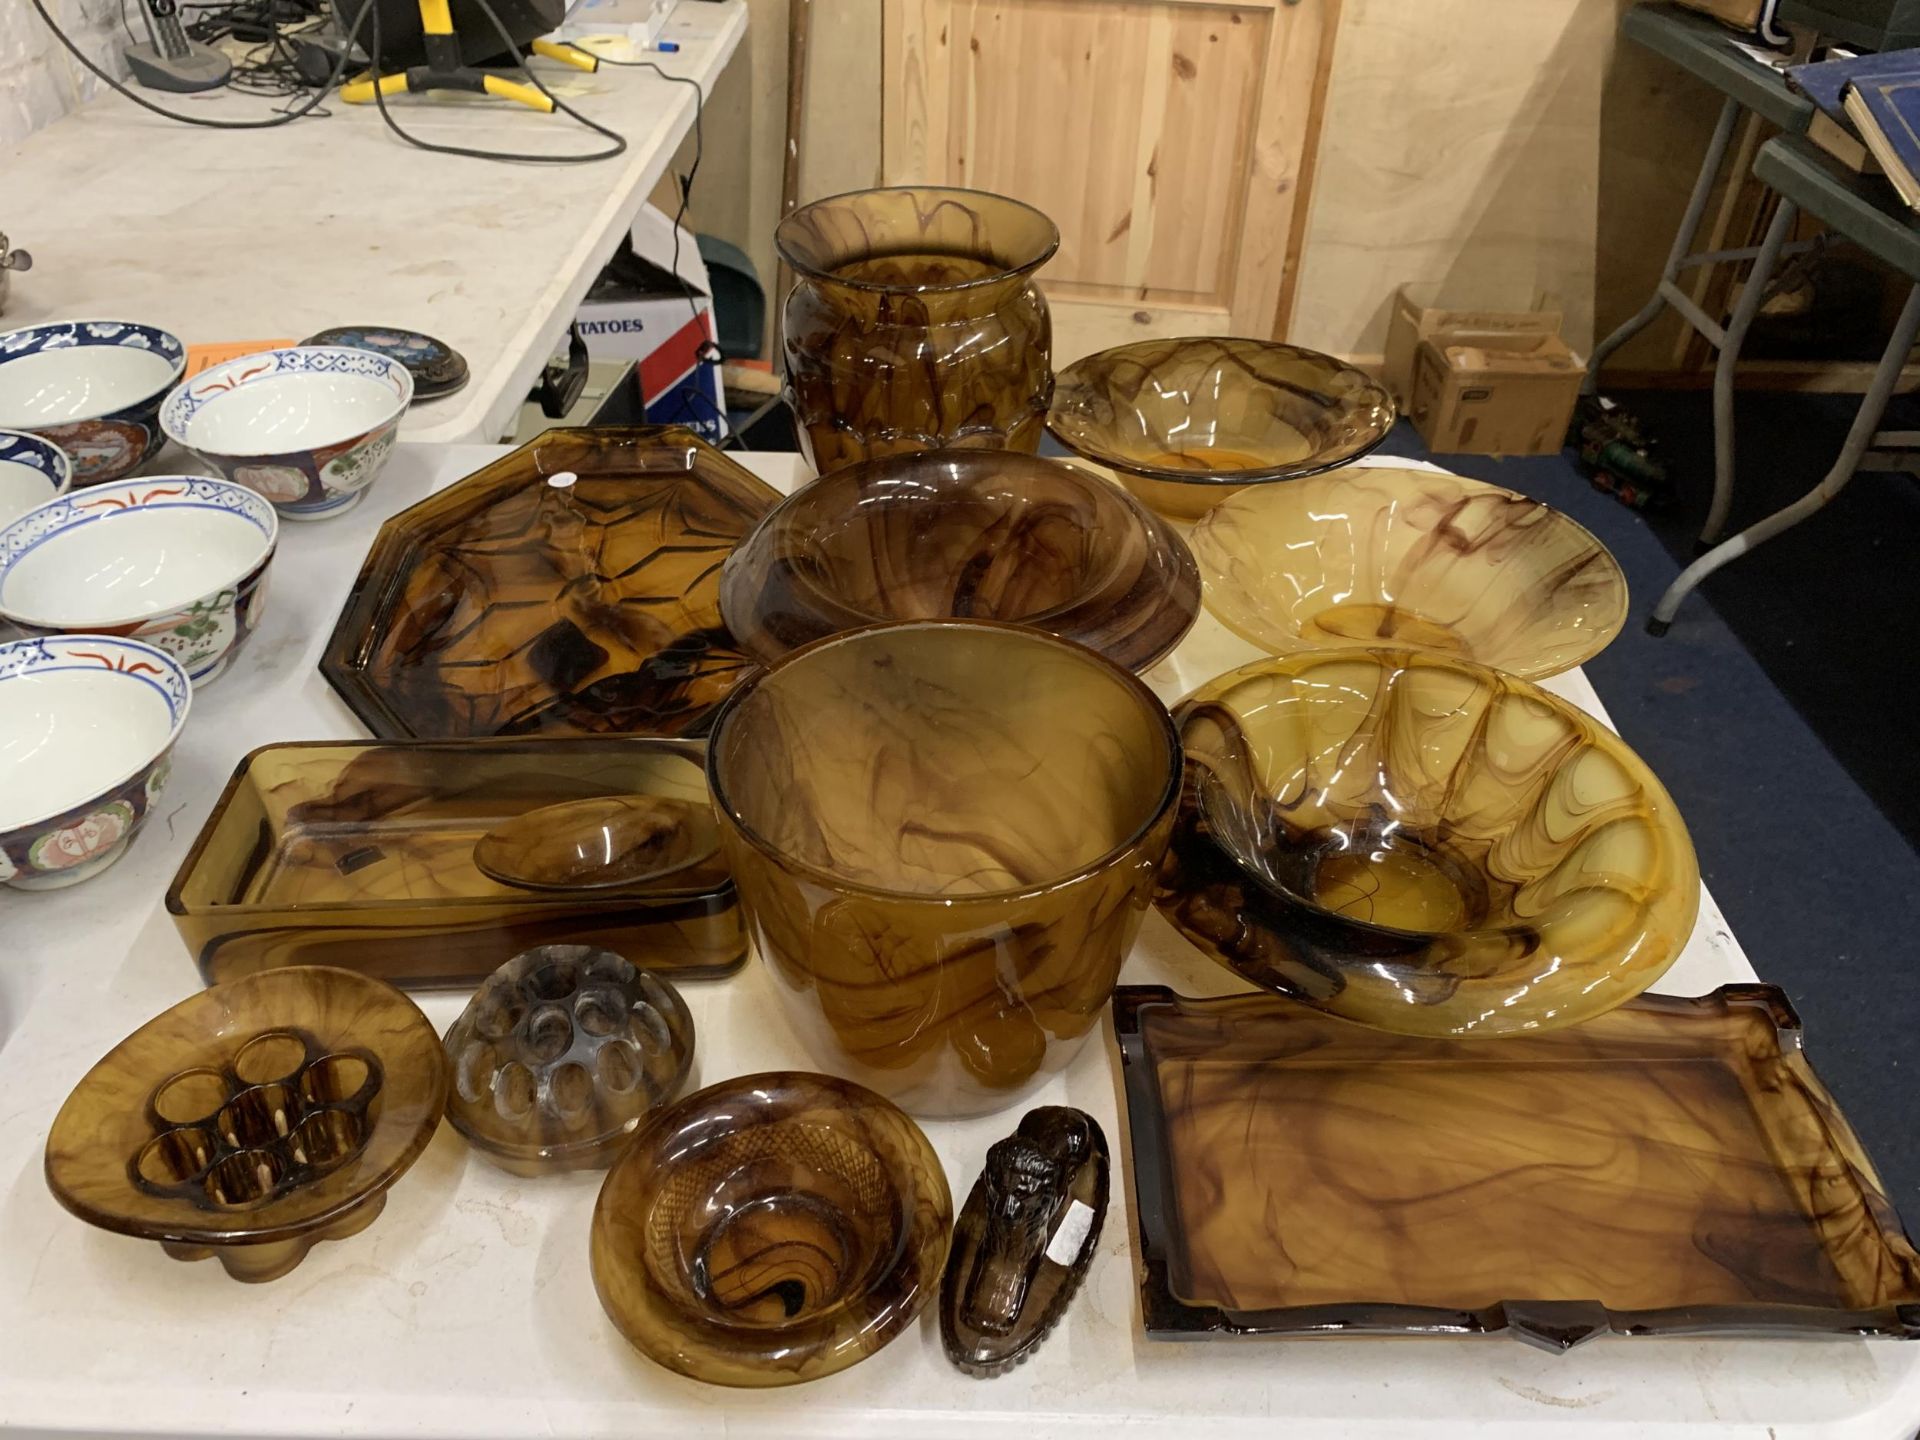 LARGE SELECTIOIN OF AMBER CLOUD GLASSWEAR TO INCLUDE FROGS, VASES, TRAYS AND MORE